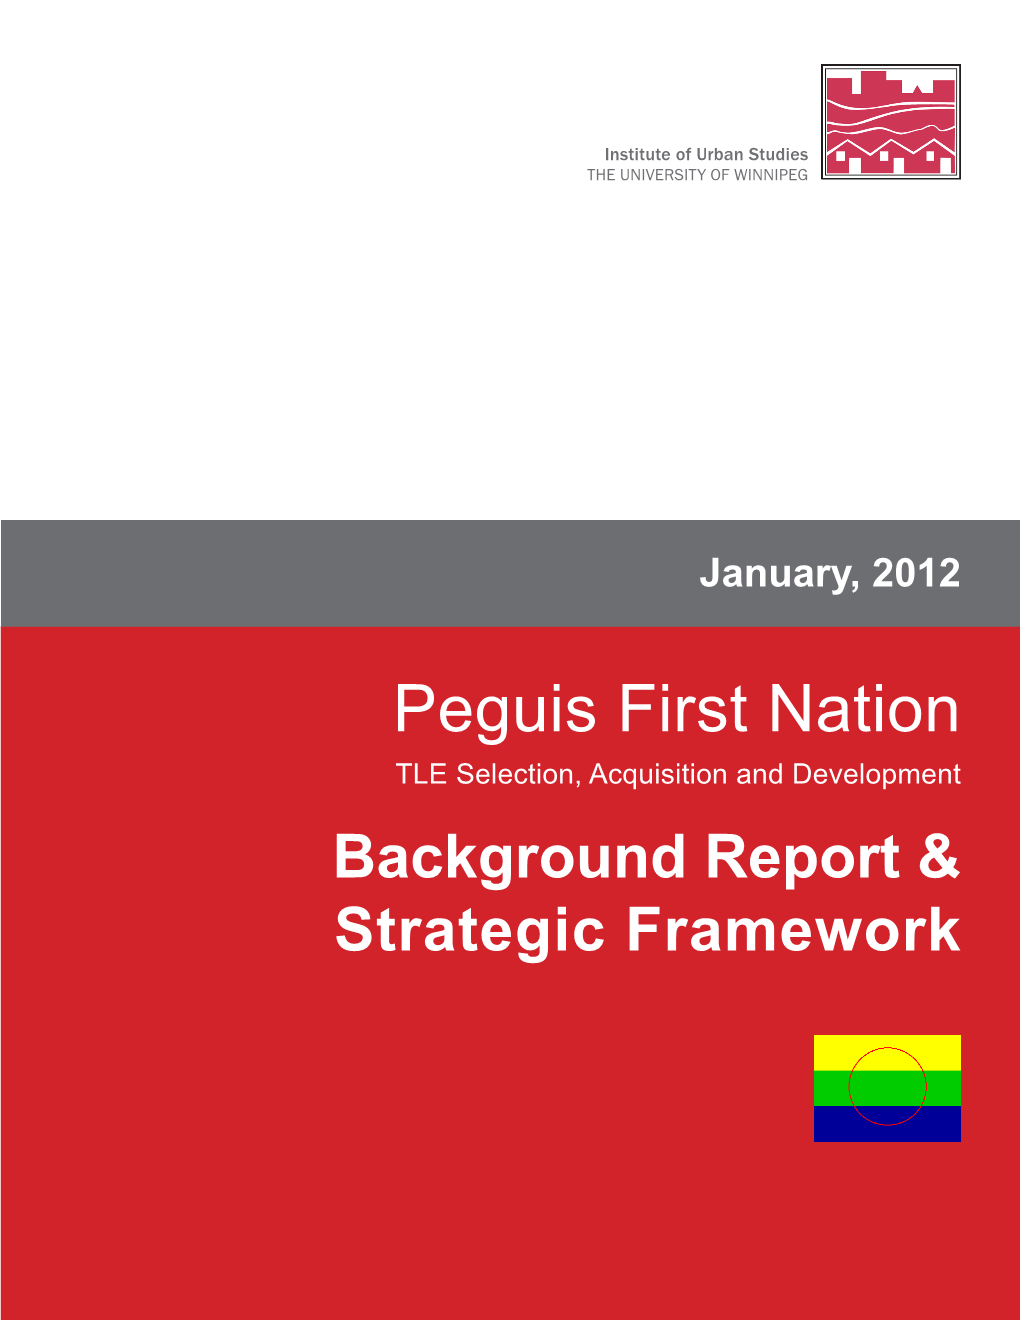 Peguis First Nation TLE Selection, Acquisition and Development Background Report & Strategic Framework INSTITUTE of URBAN STUDIES UNIVERSITY of WINNIPEG